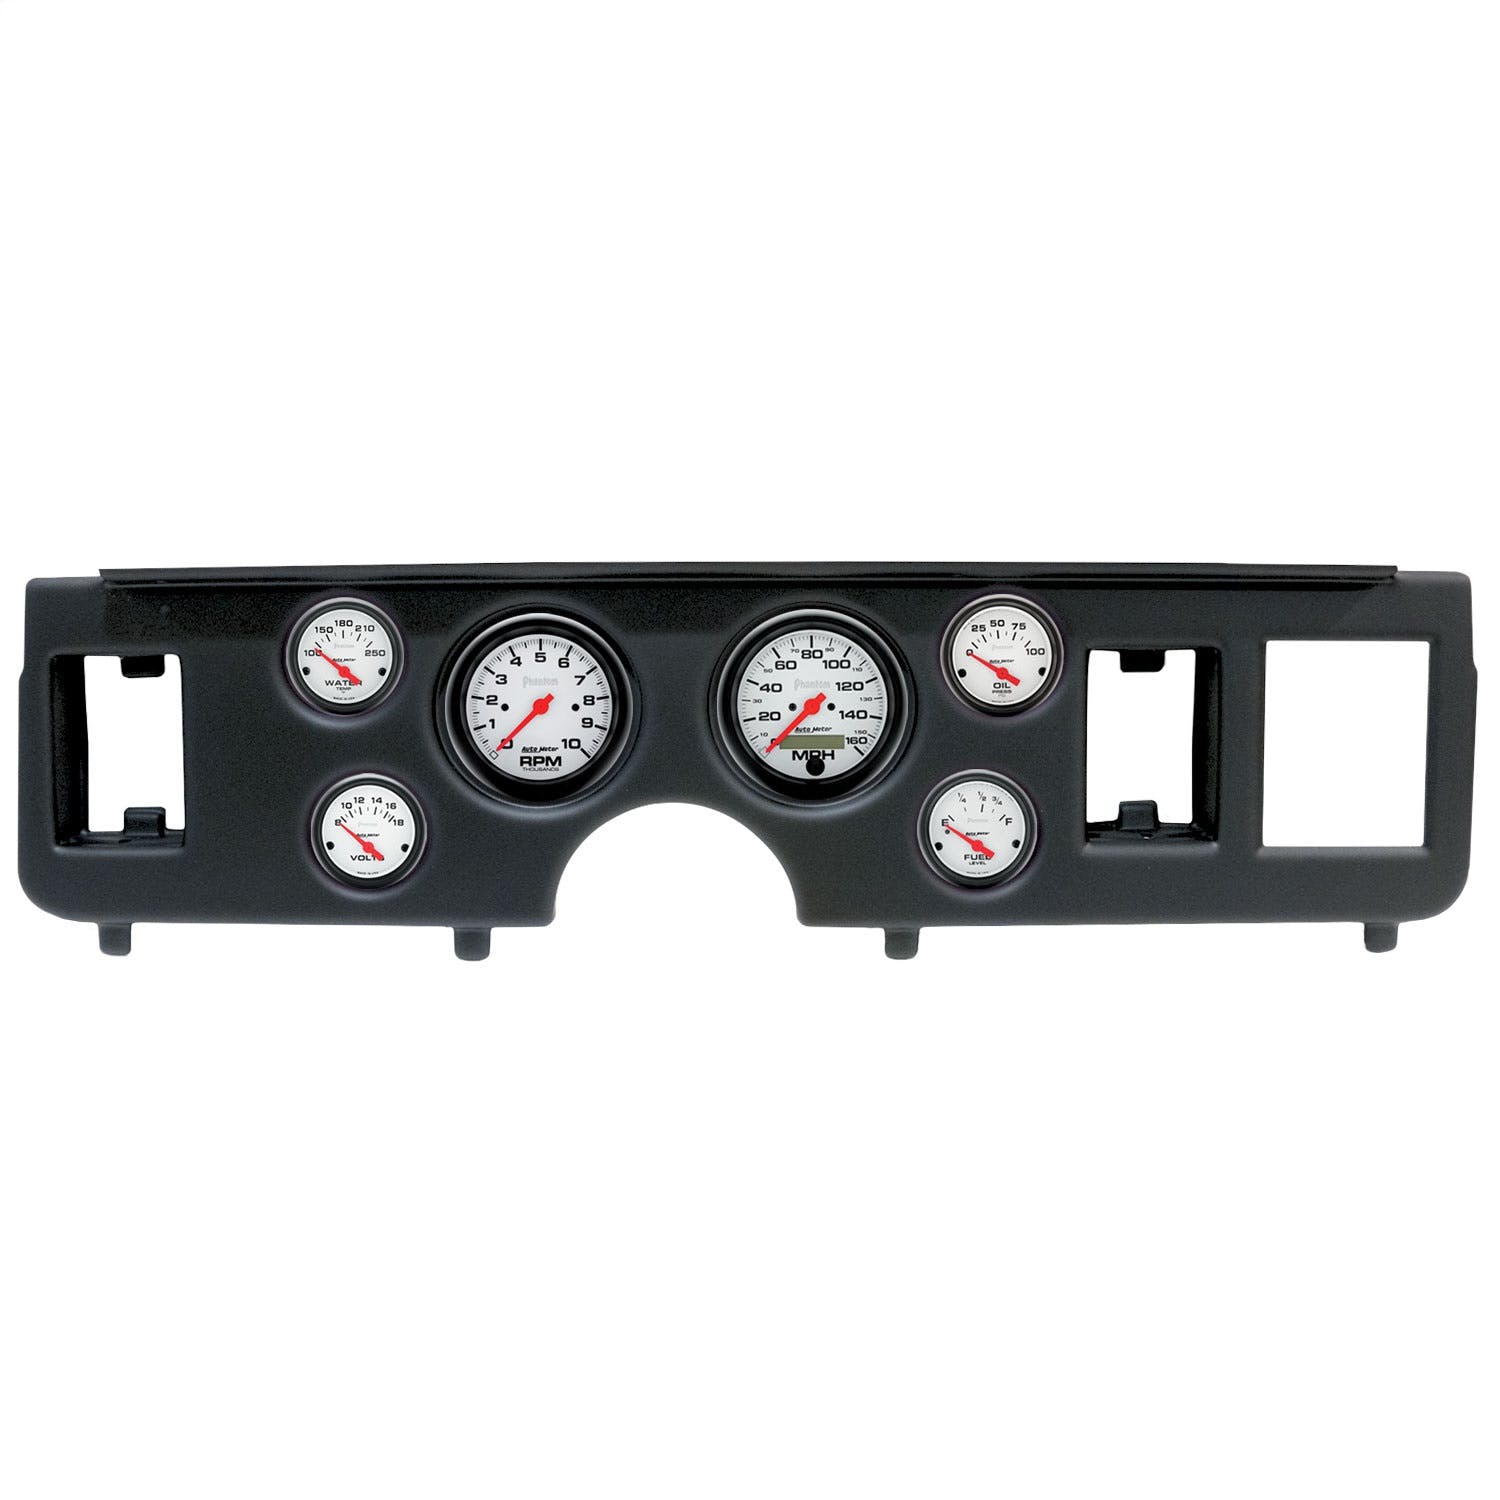 AutoMeter Products 2917-09 6 Gauge Direct-Fit Dash Kit, Ford Mustang 79-86, Phantom